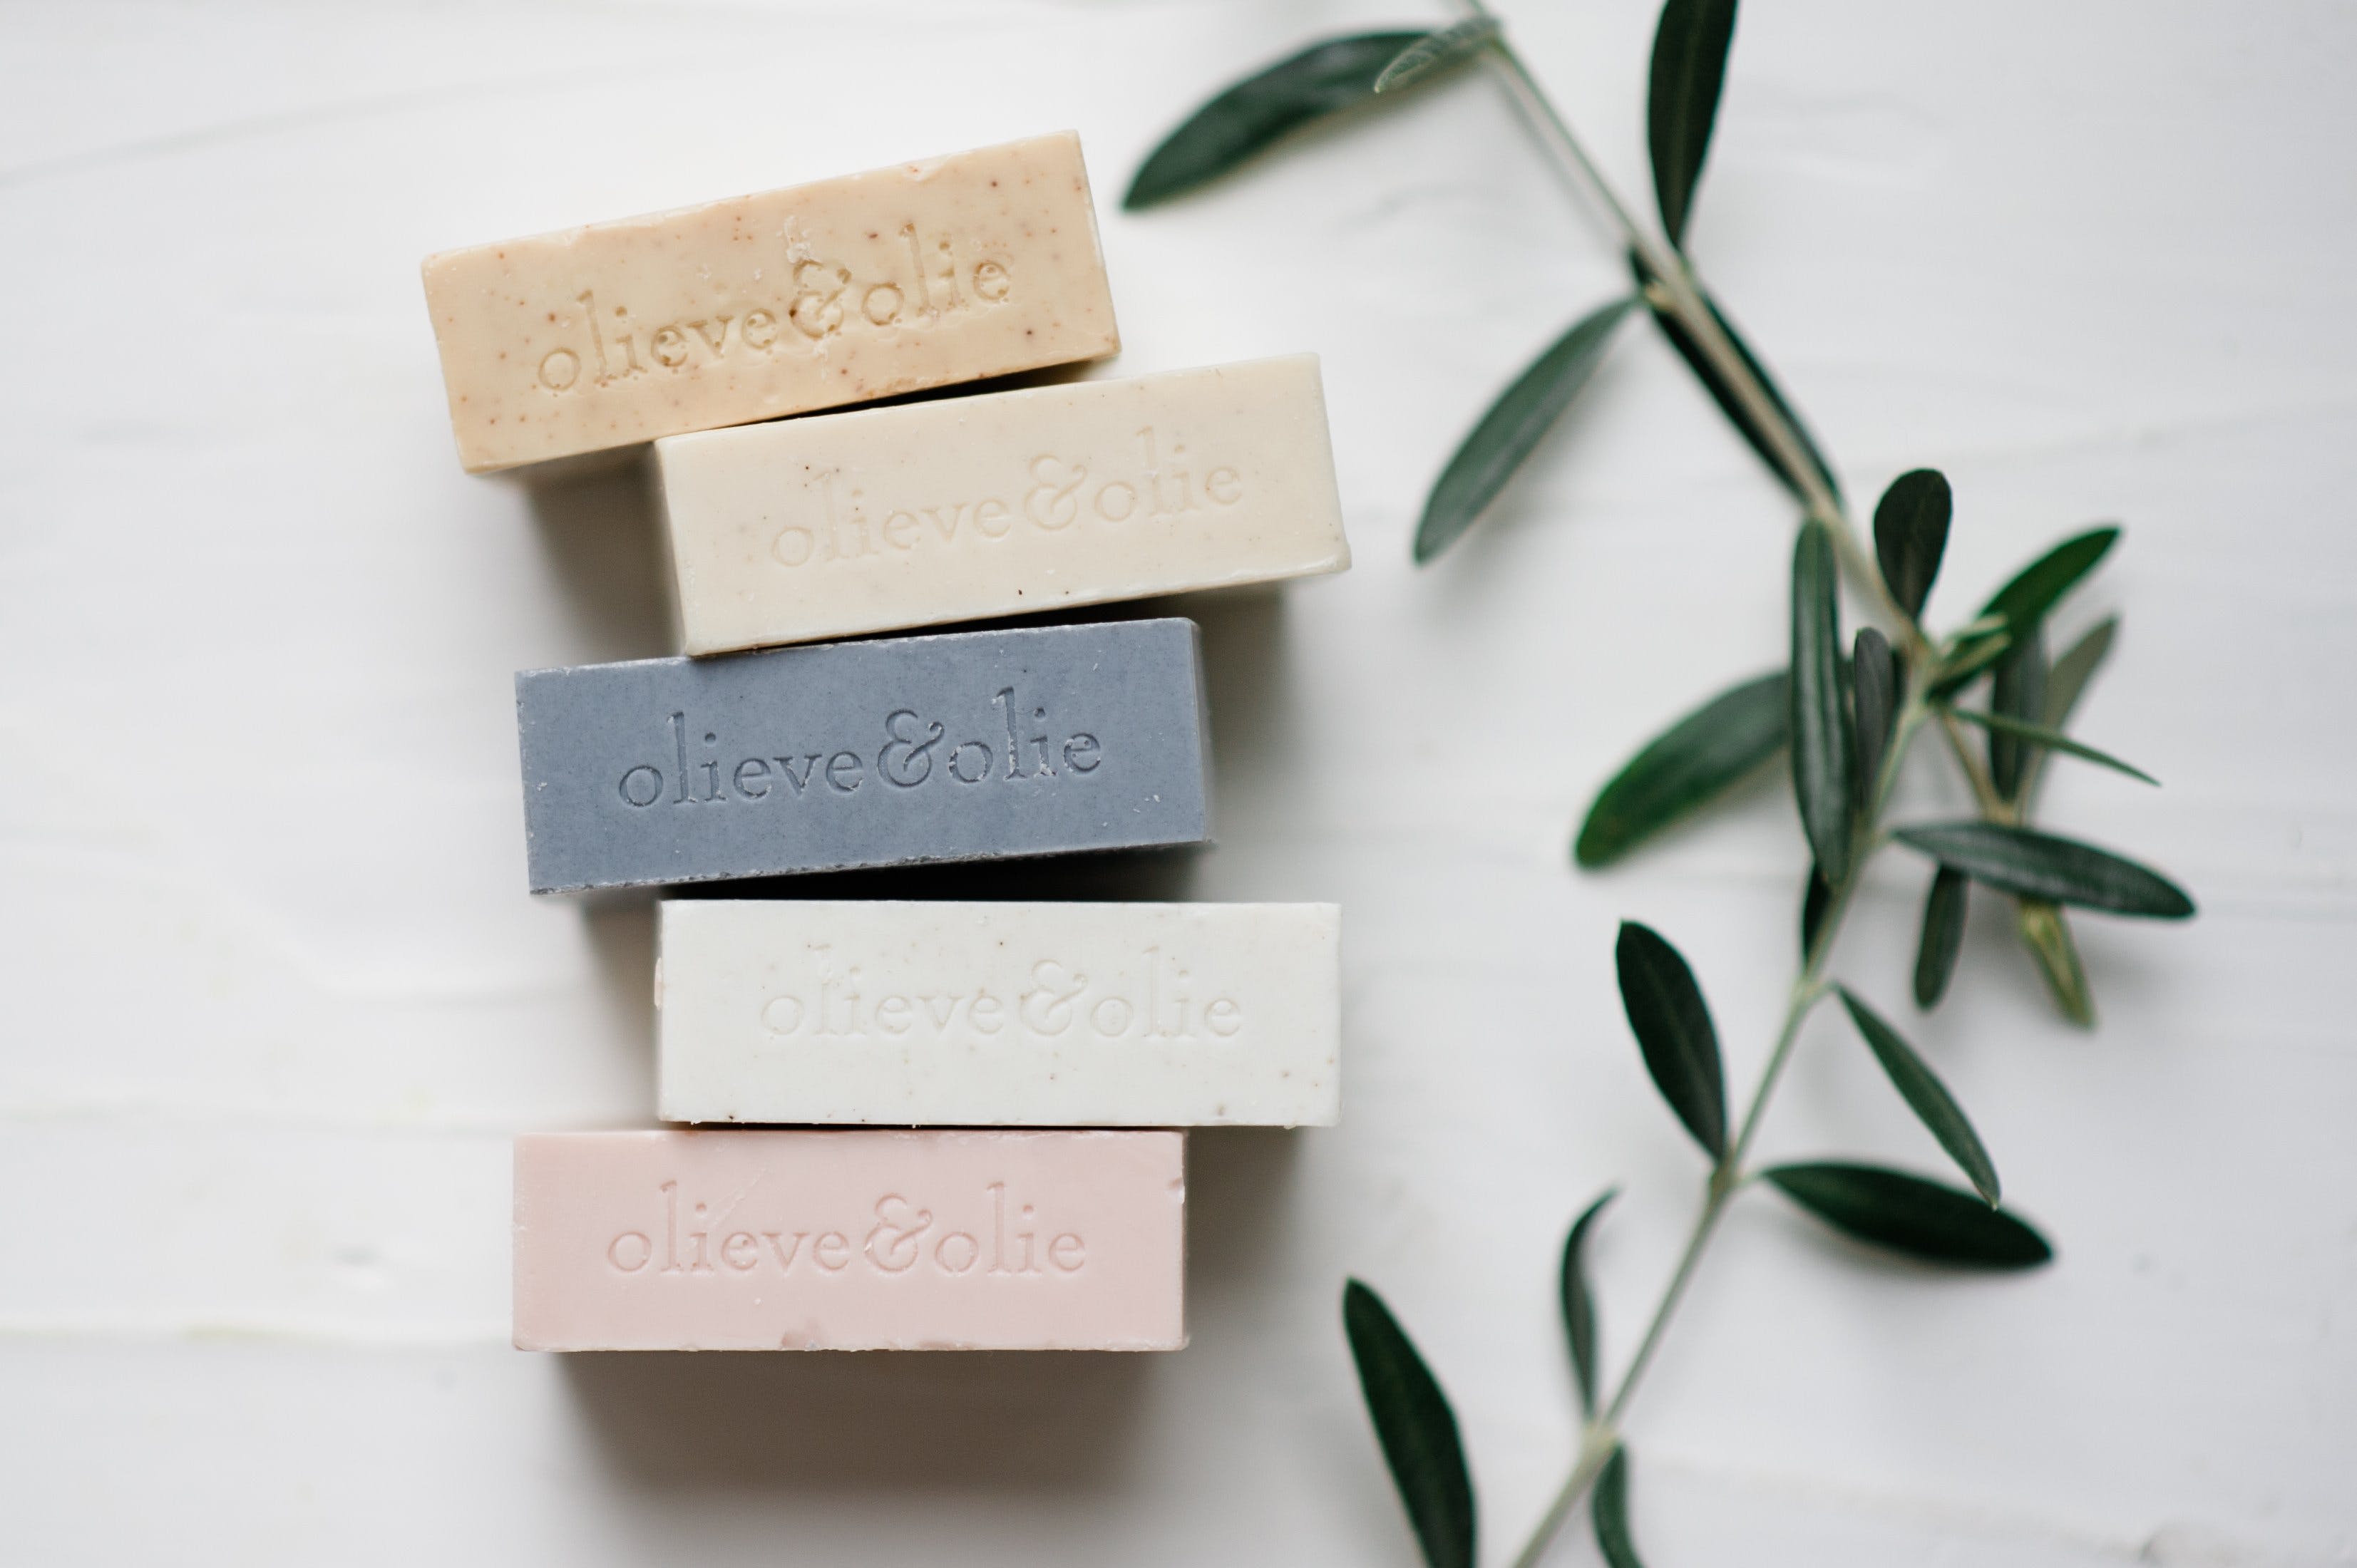 Olieve and Olie Skincare Factory - Accommodation Directory